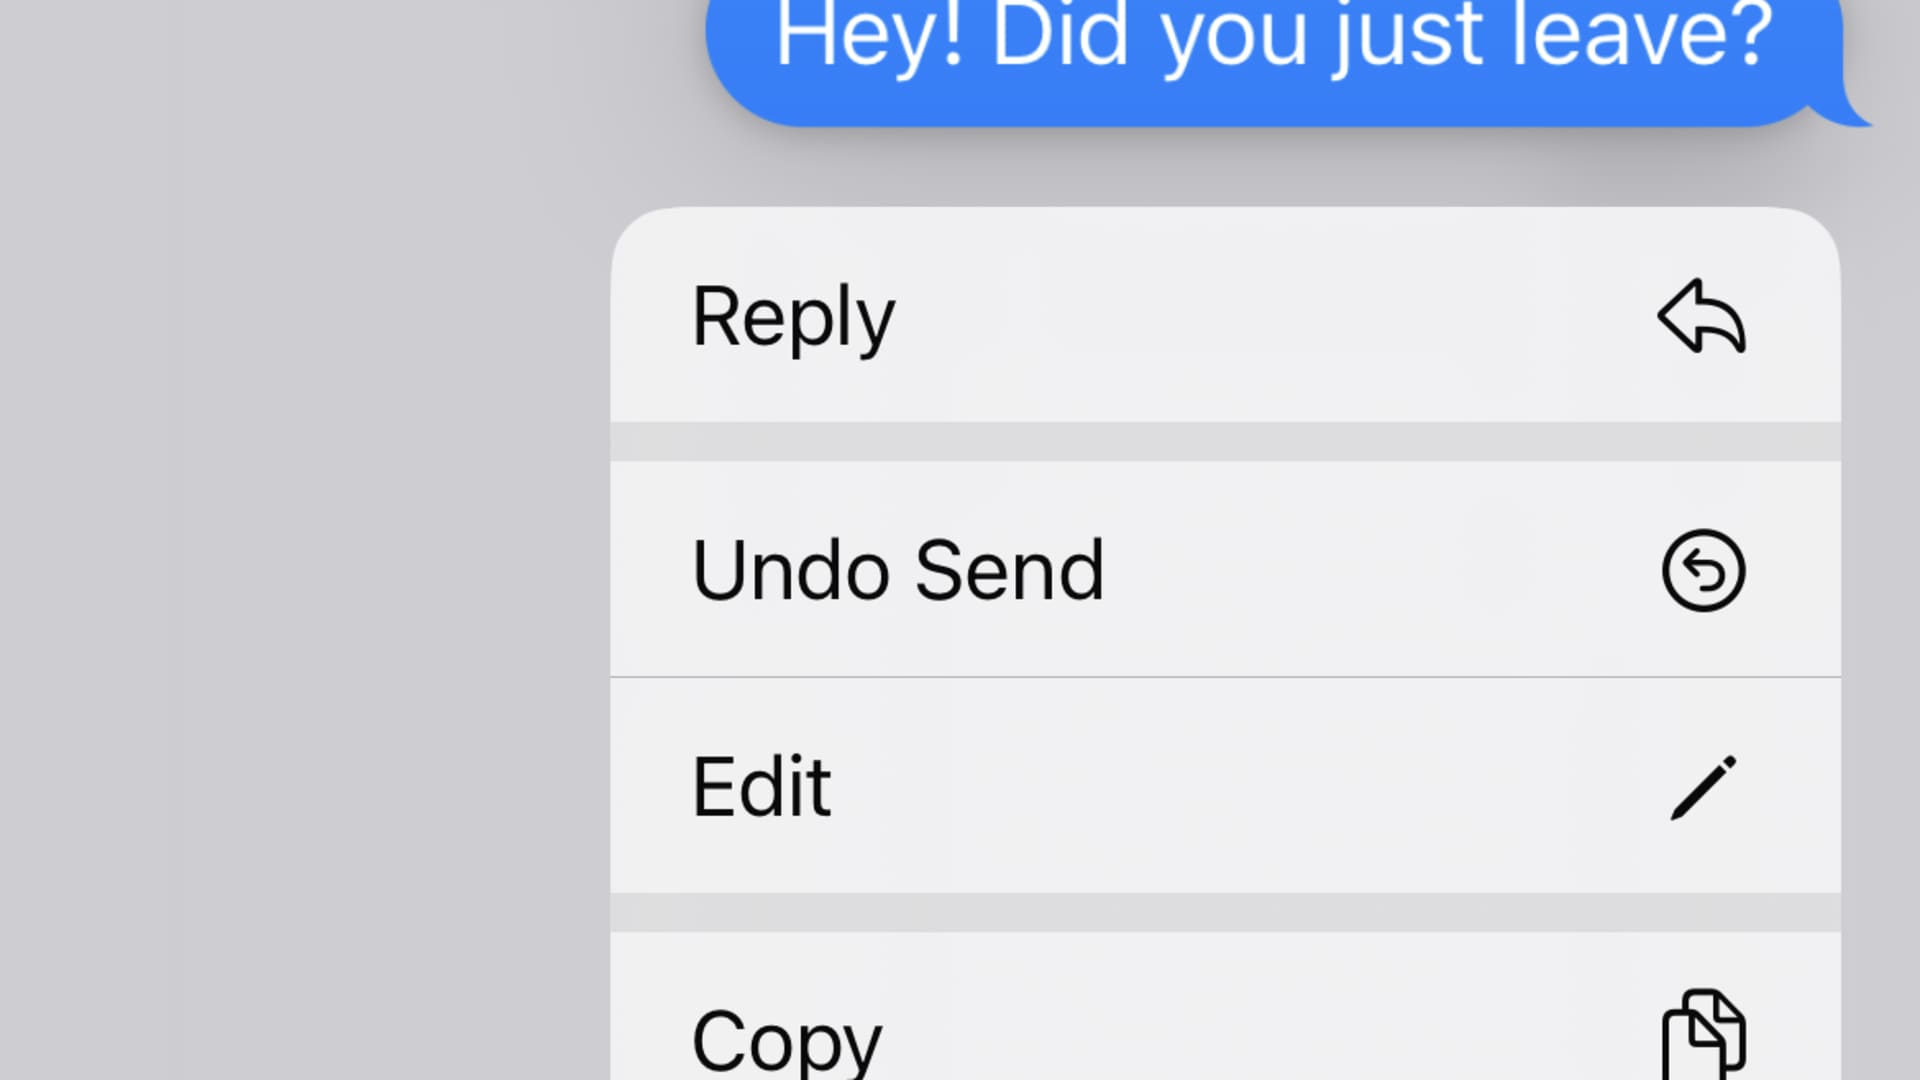 You can now edit and delete iMessages on iOS16.